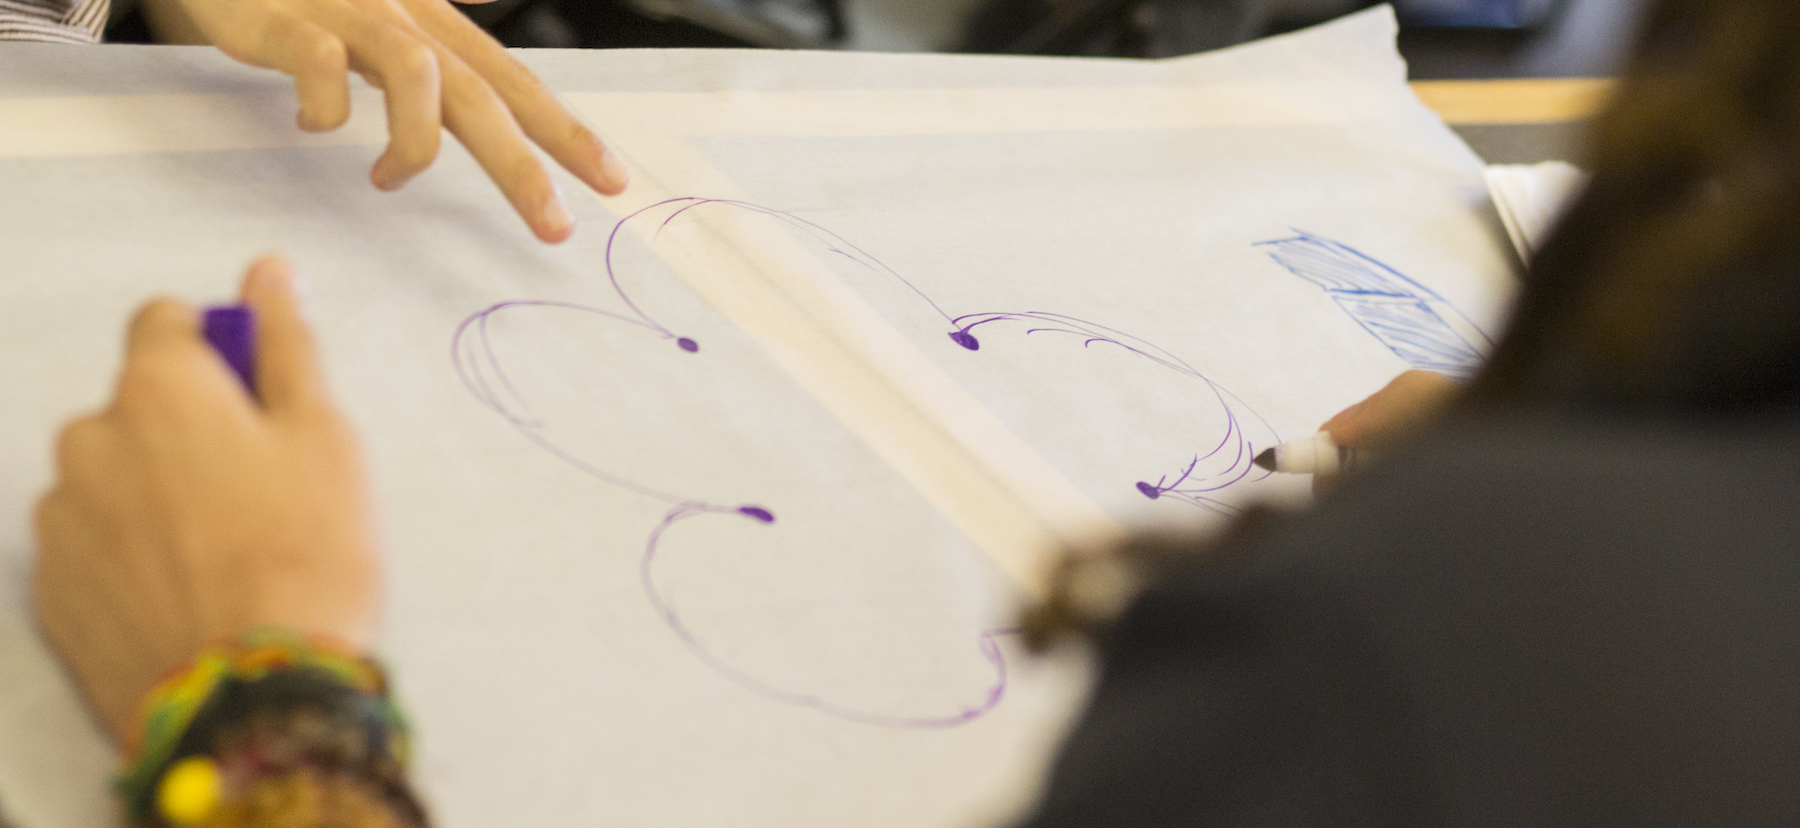 Students participant in an in-class drawing exercise